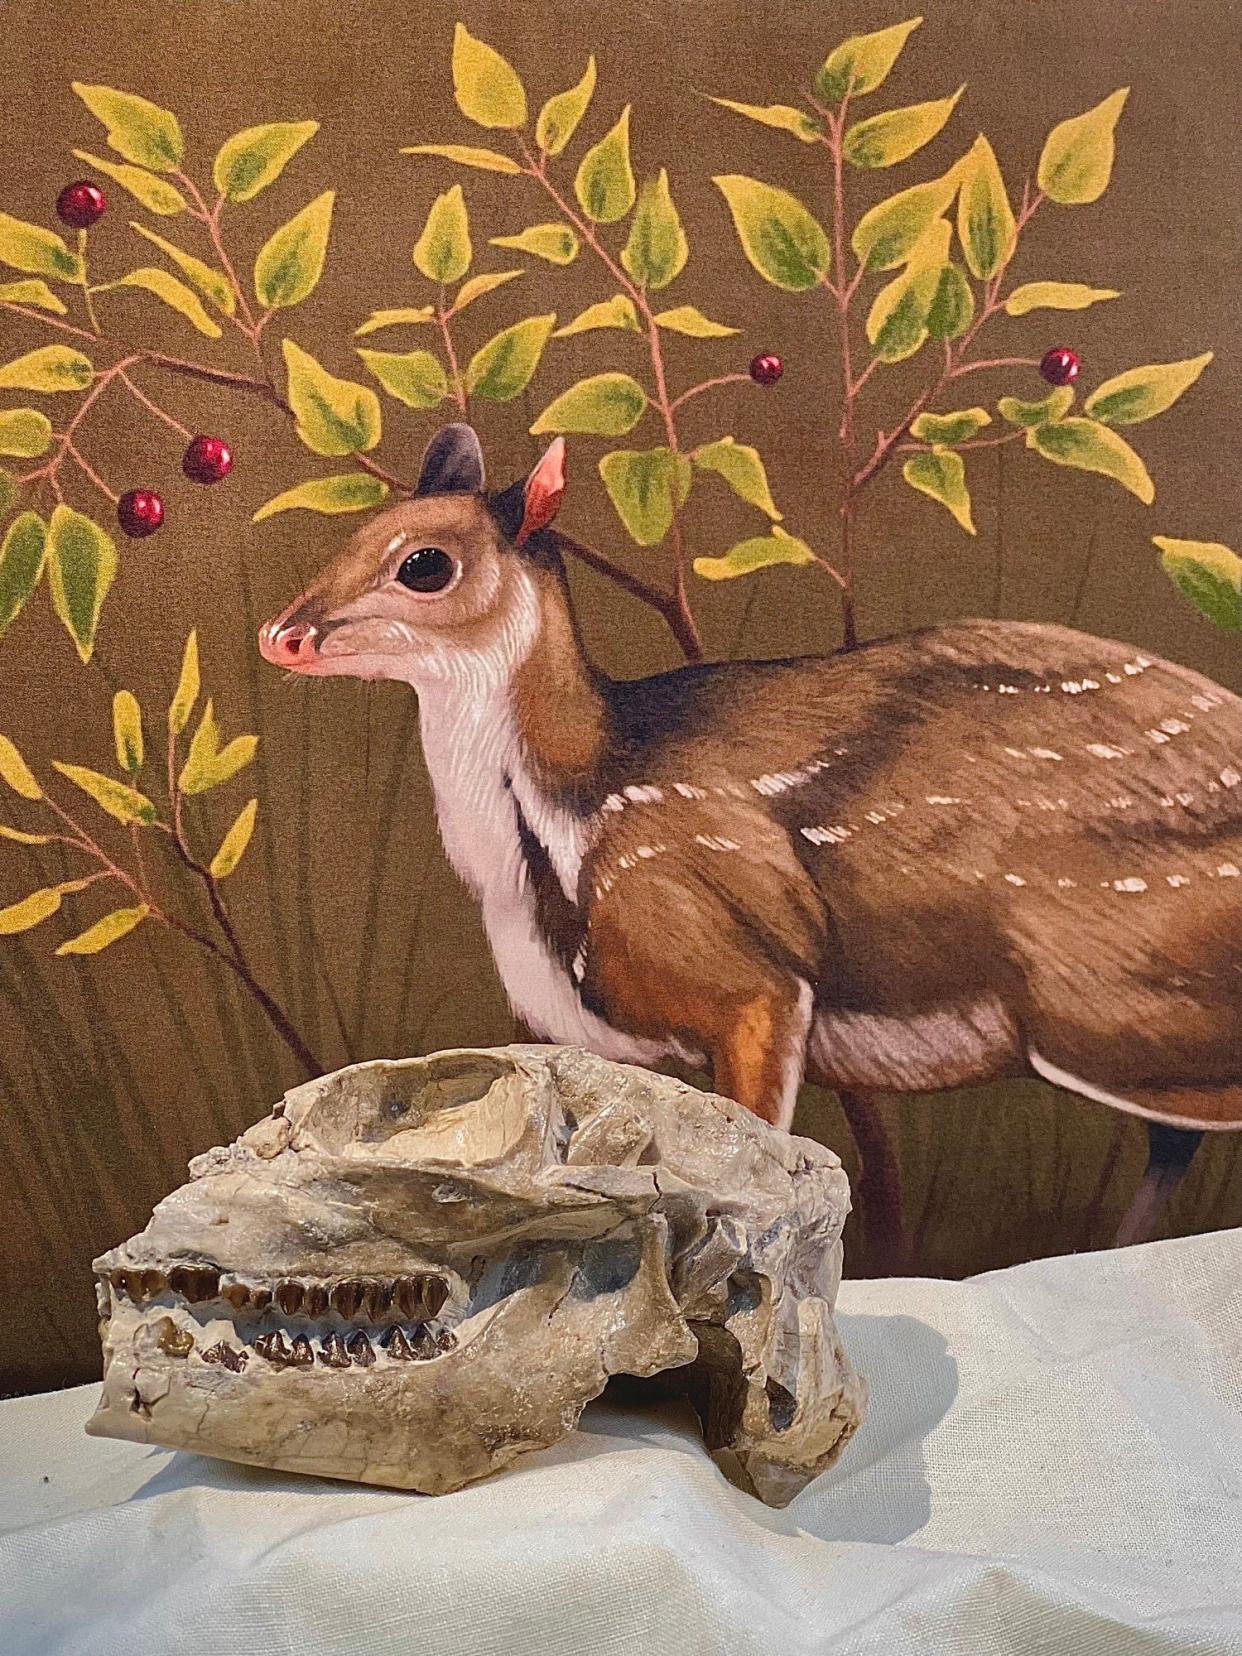 A handout photo of an artistic representation of what Santuccimeryx might have looked like by Benji Paysnoe with a skull fossil in front of it. Researchers discovered the deer genus in Badlands National Park, according to the National Park Service.